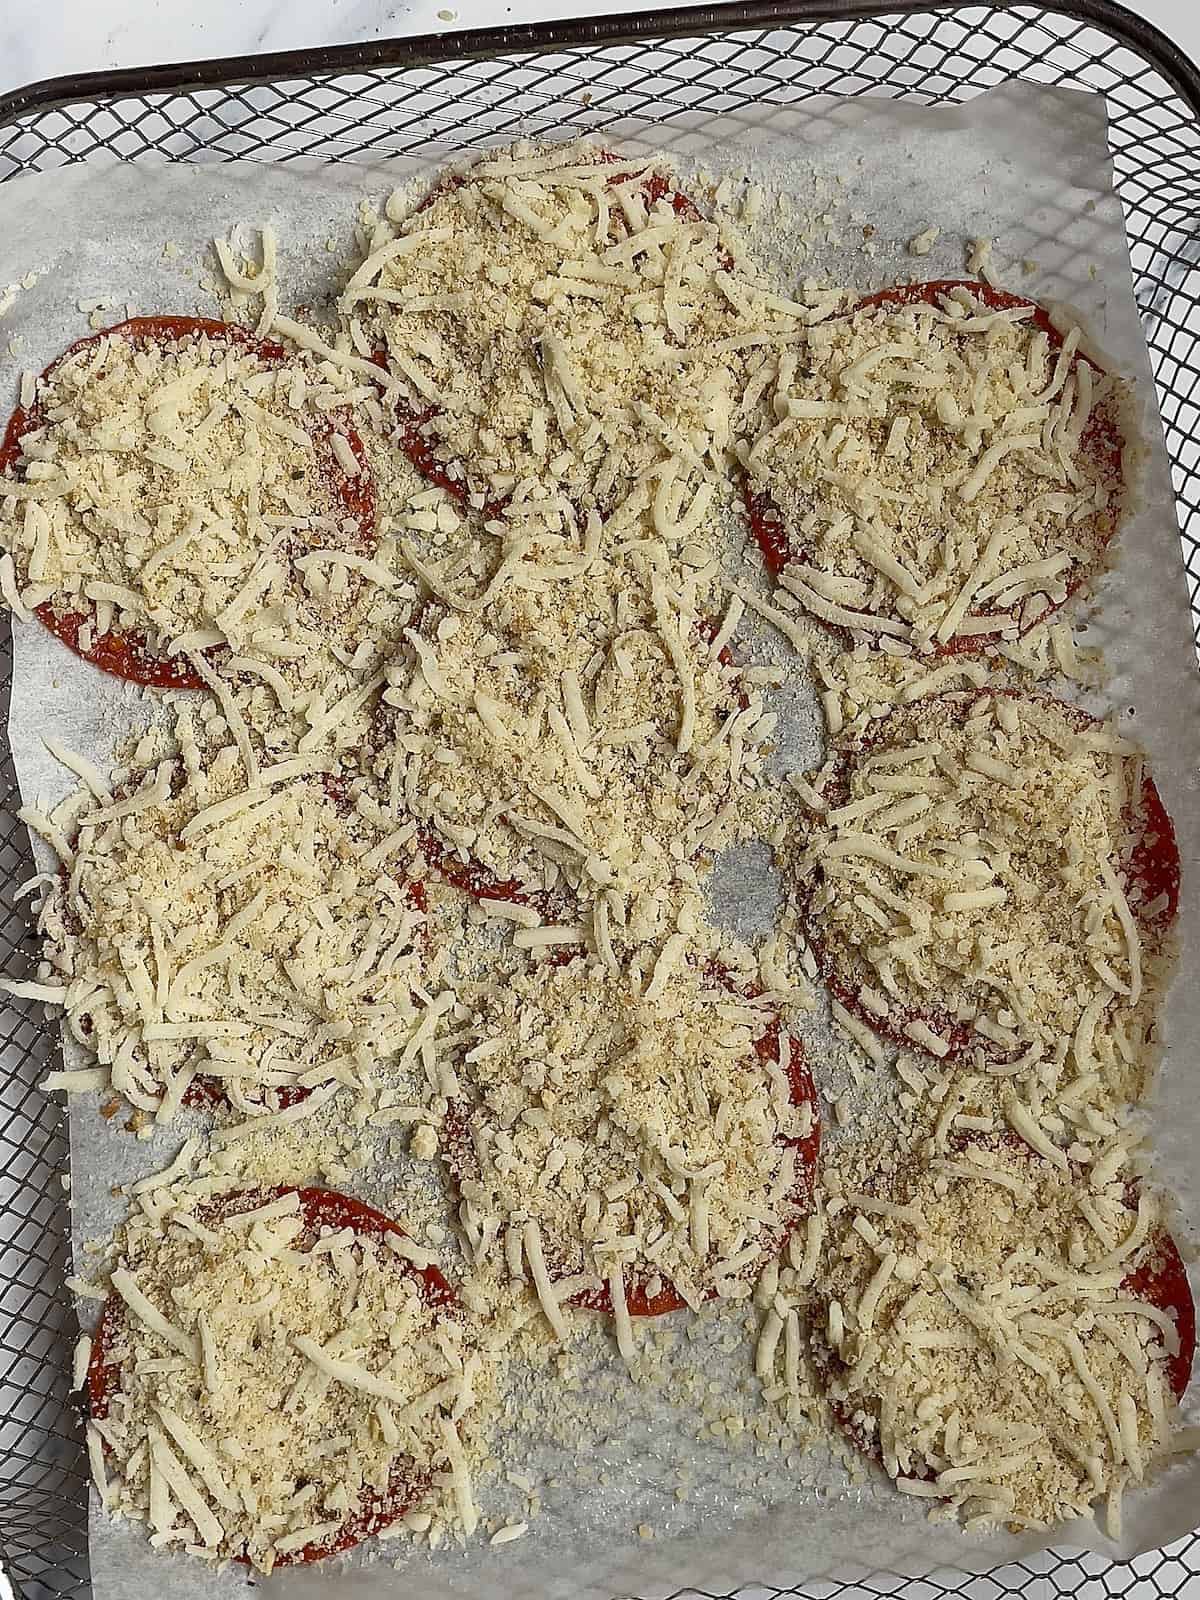 pepperoni sprinkled with mozzarella cheese in an air fryer basket